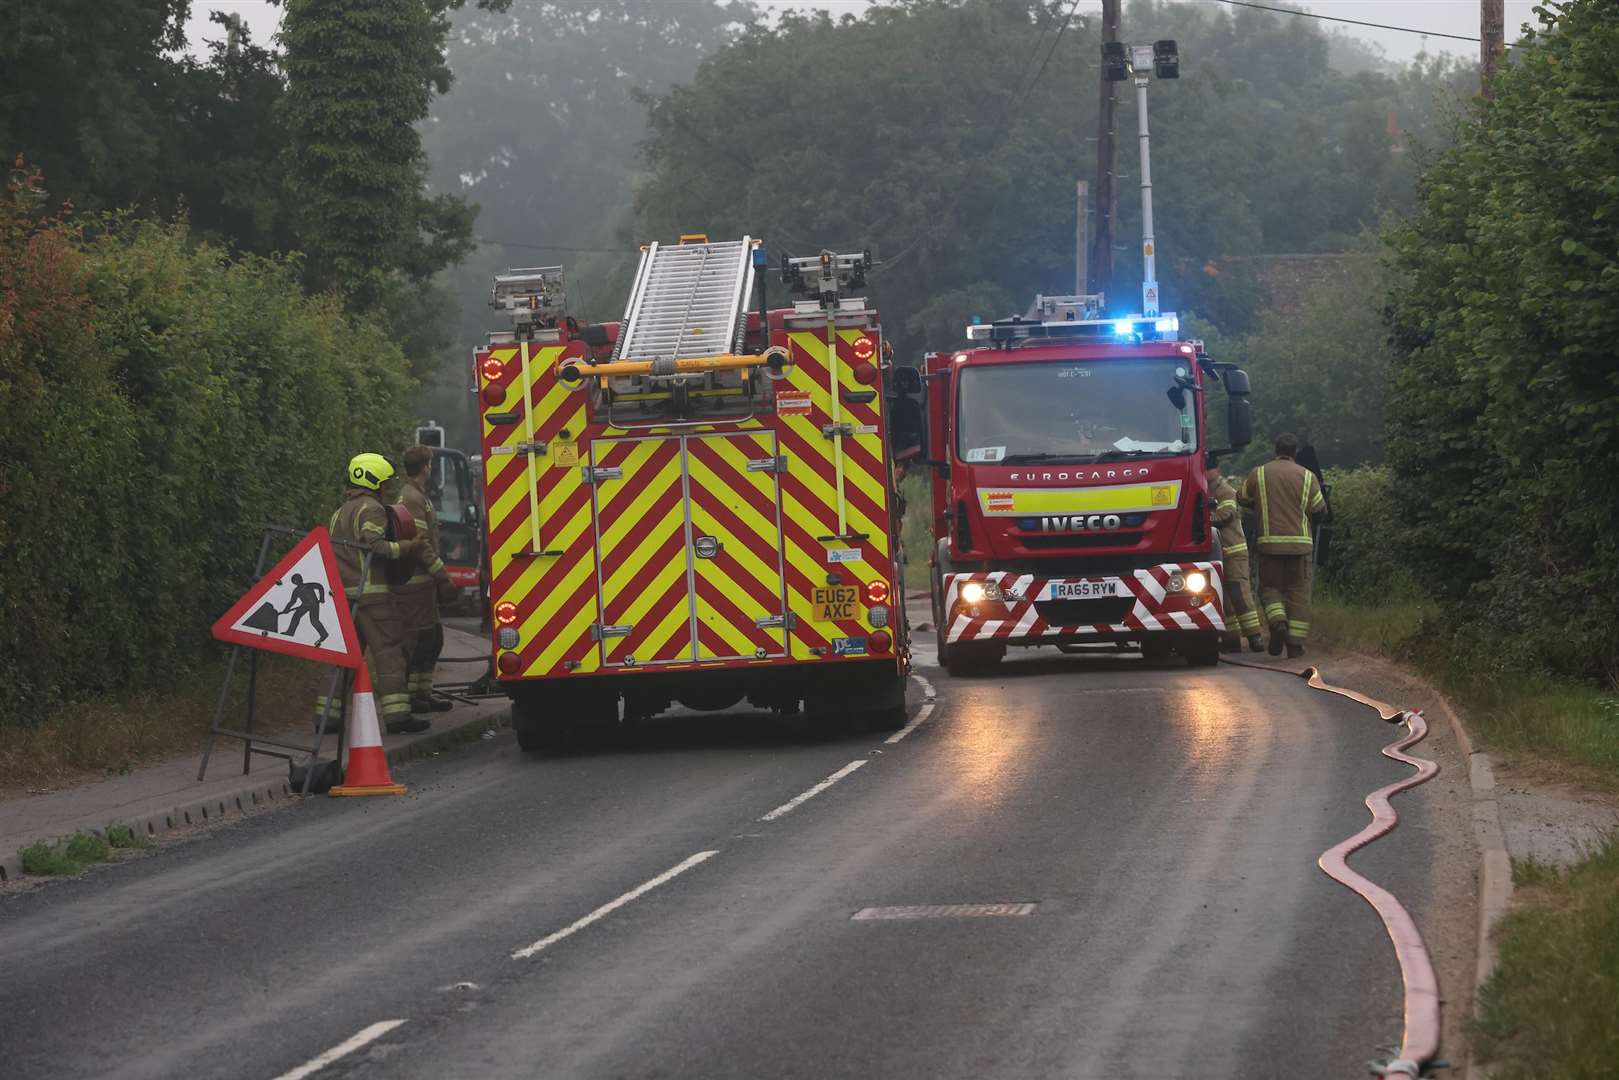 The gas main fire in Maidstone Road, Sutton Valence, near Maidstone. Picture: UKNIP